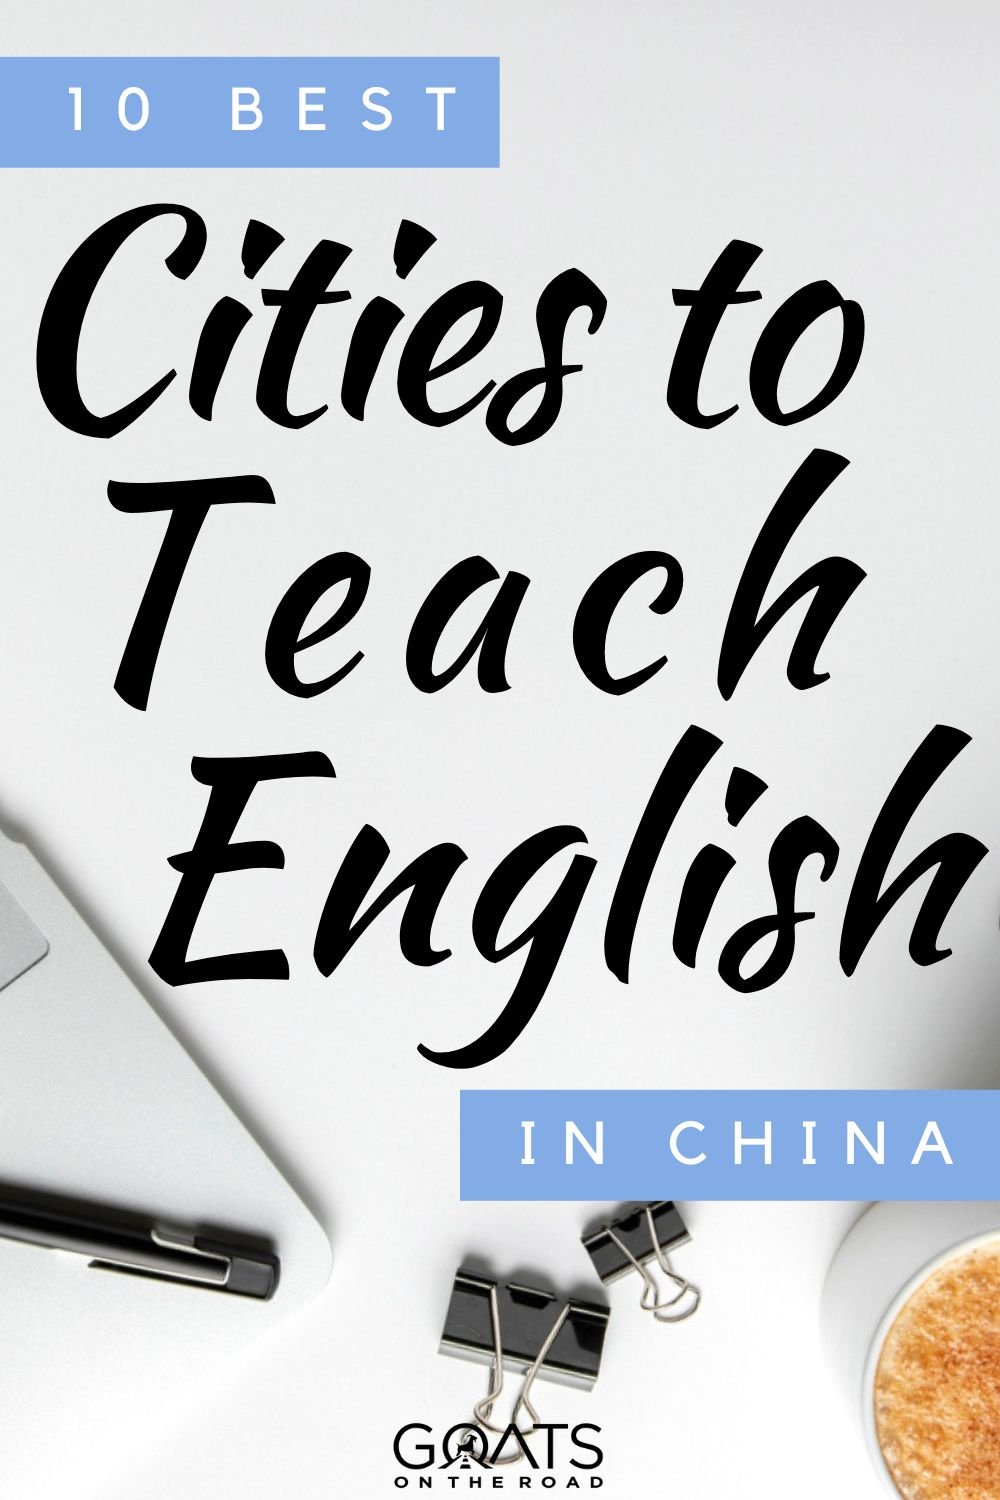 “10 Best Cities to Teach English in China